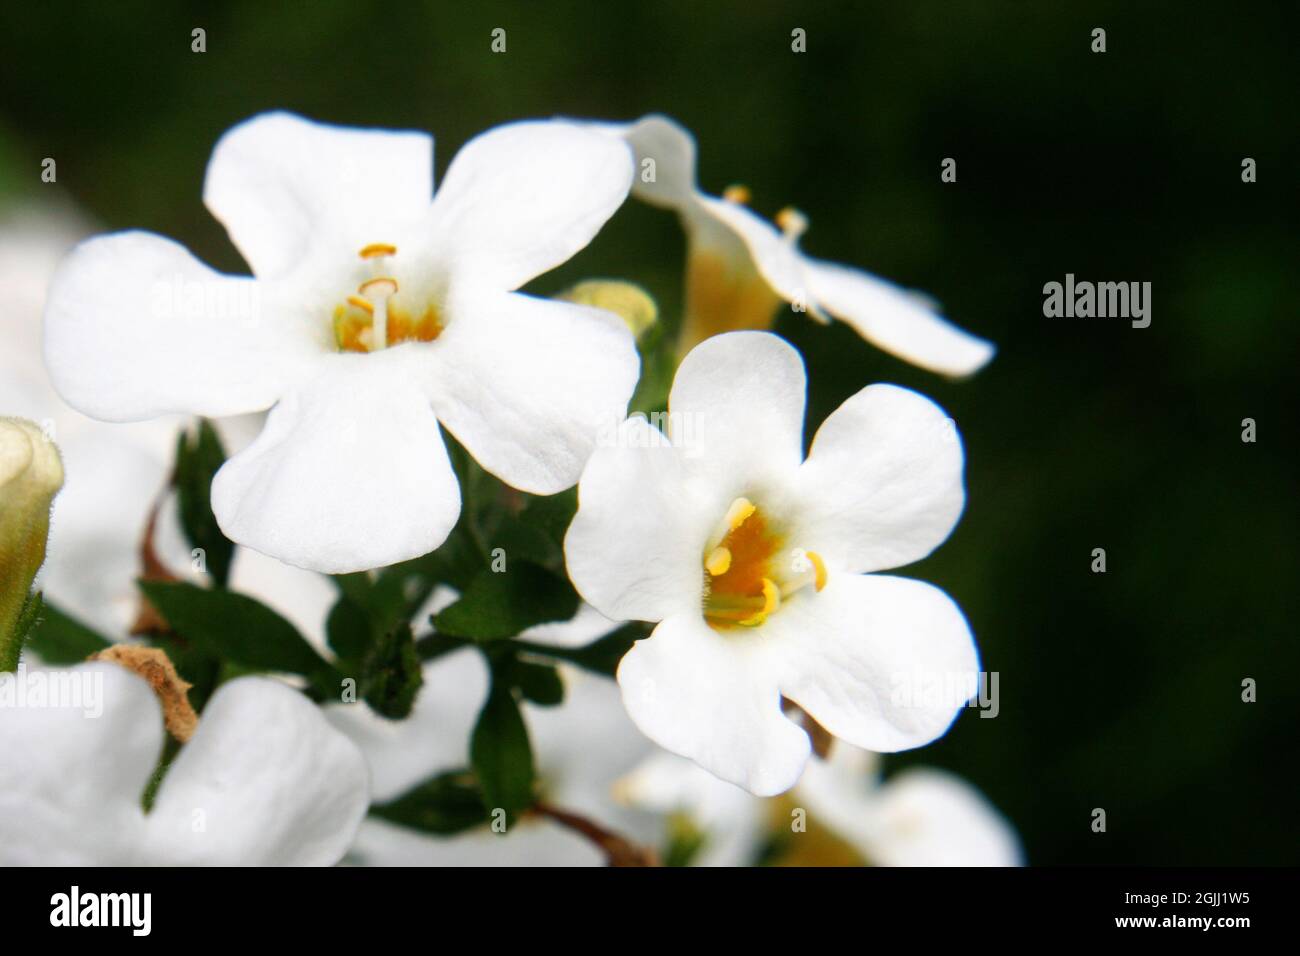 White flowers of waterhyssop or water hyssop (Bacopa speciosa 'Snowflake') close up Stock Photo